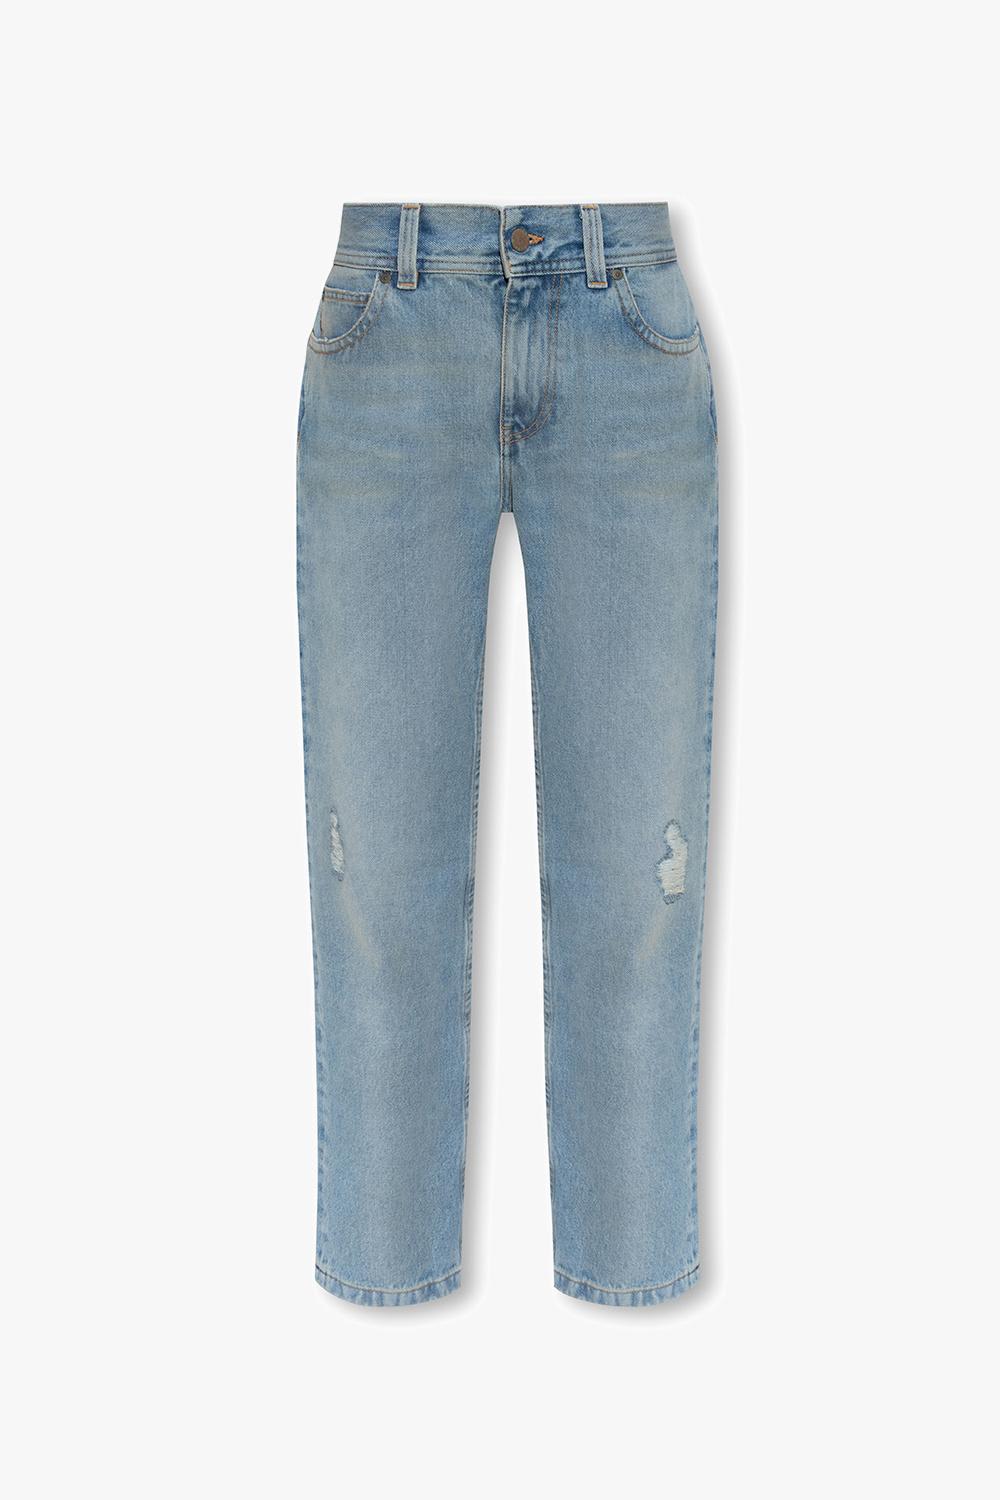 PALM ANGELS DISTRESSED JEANS